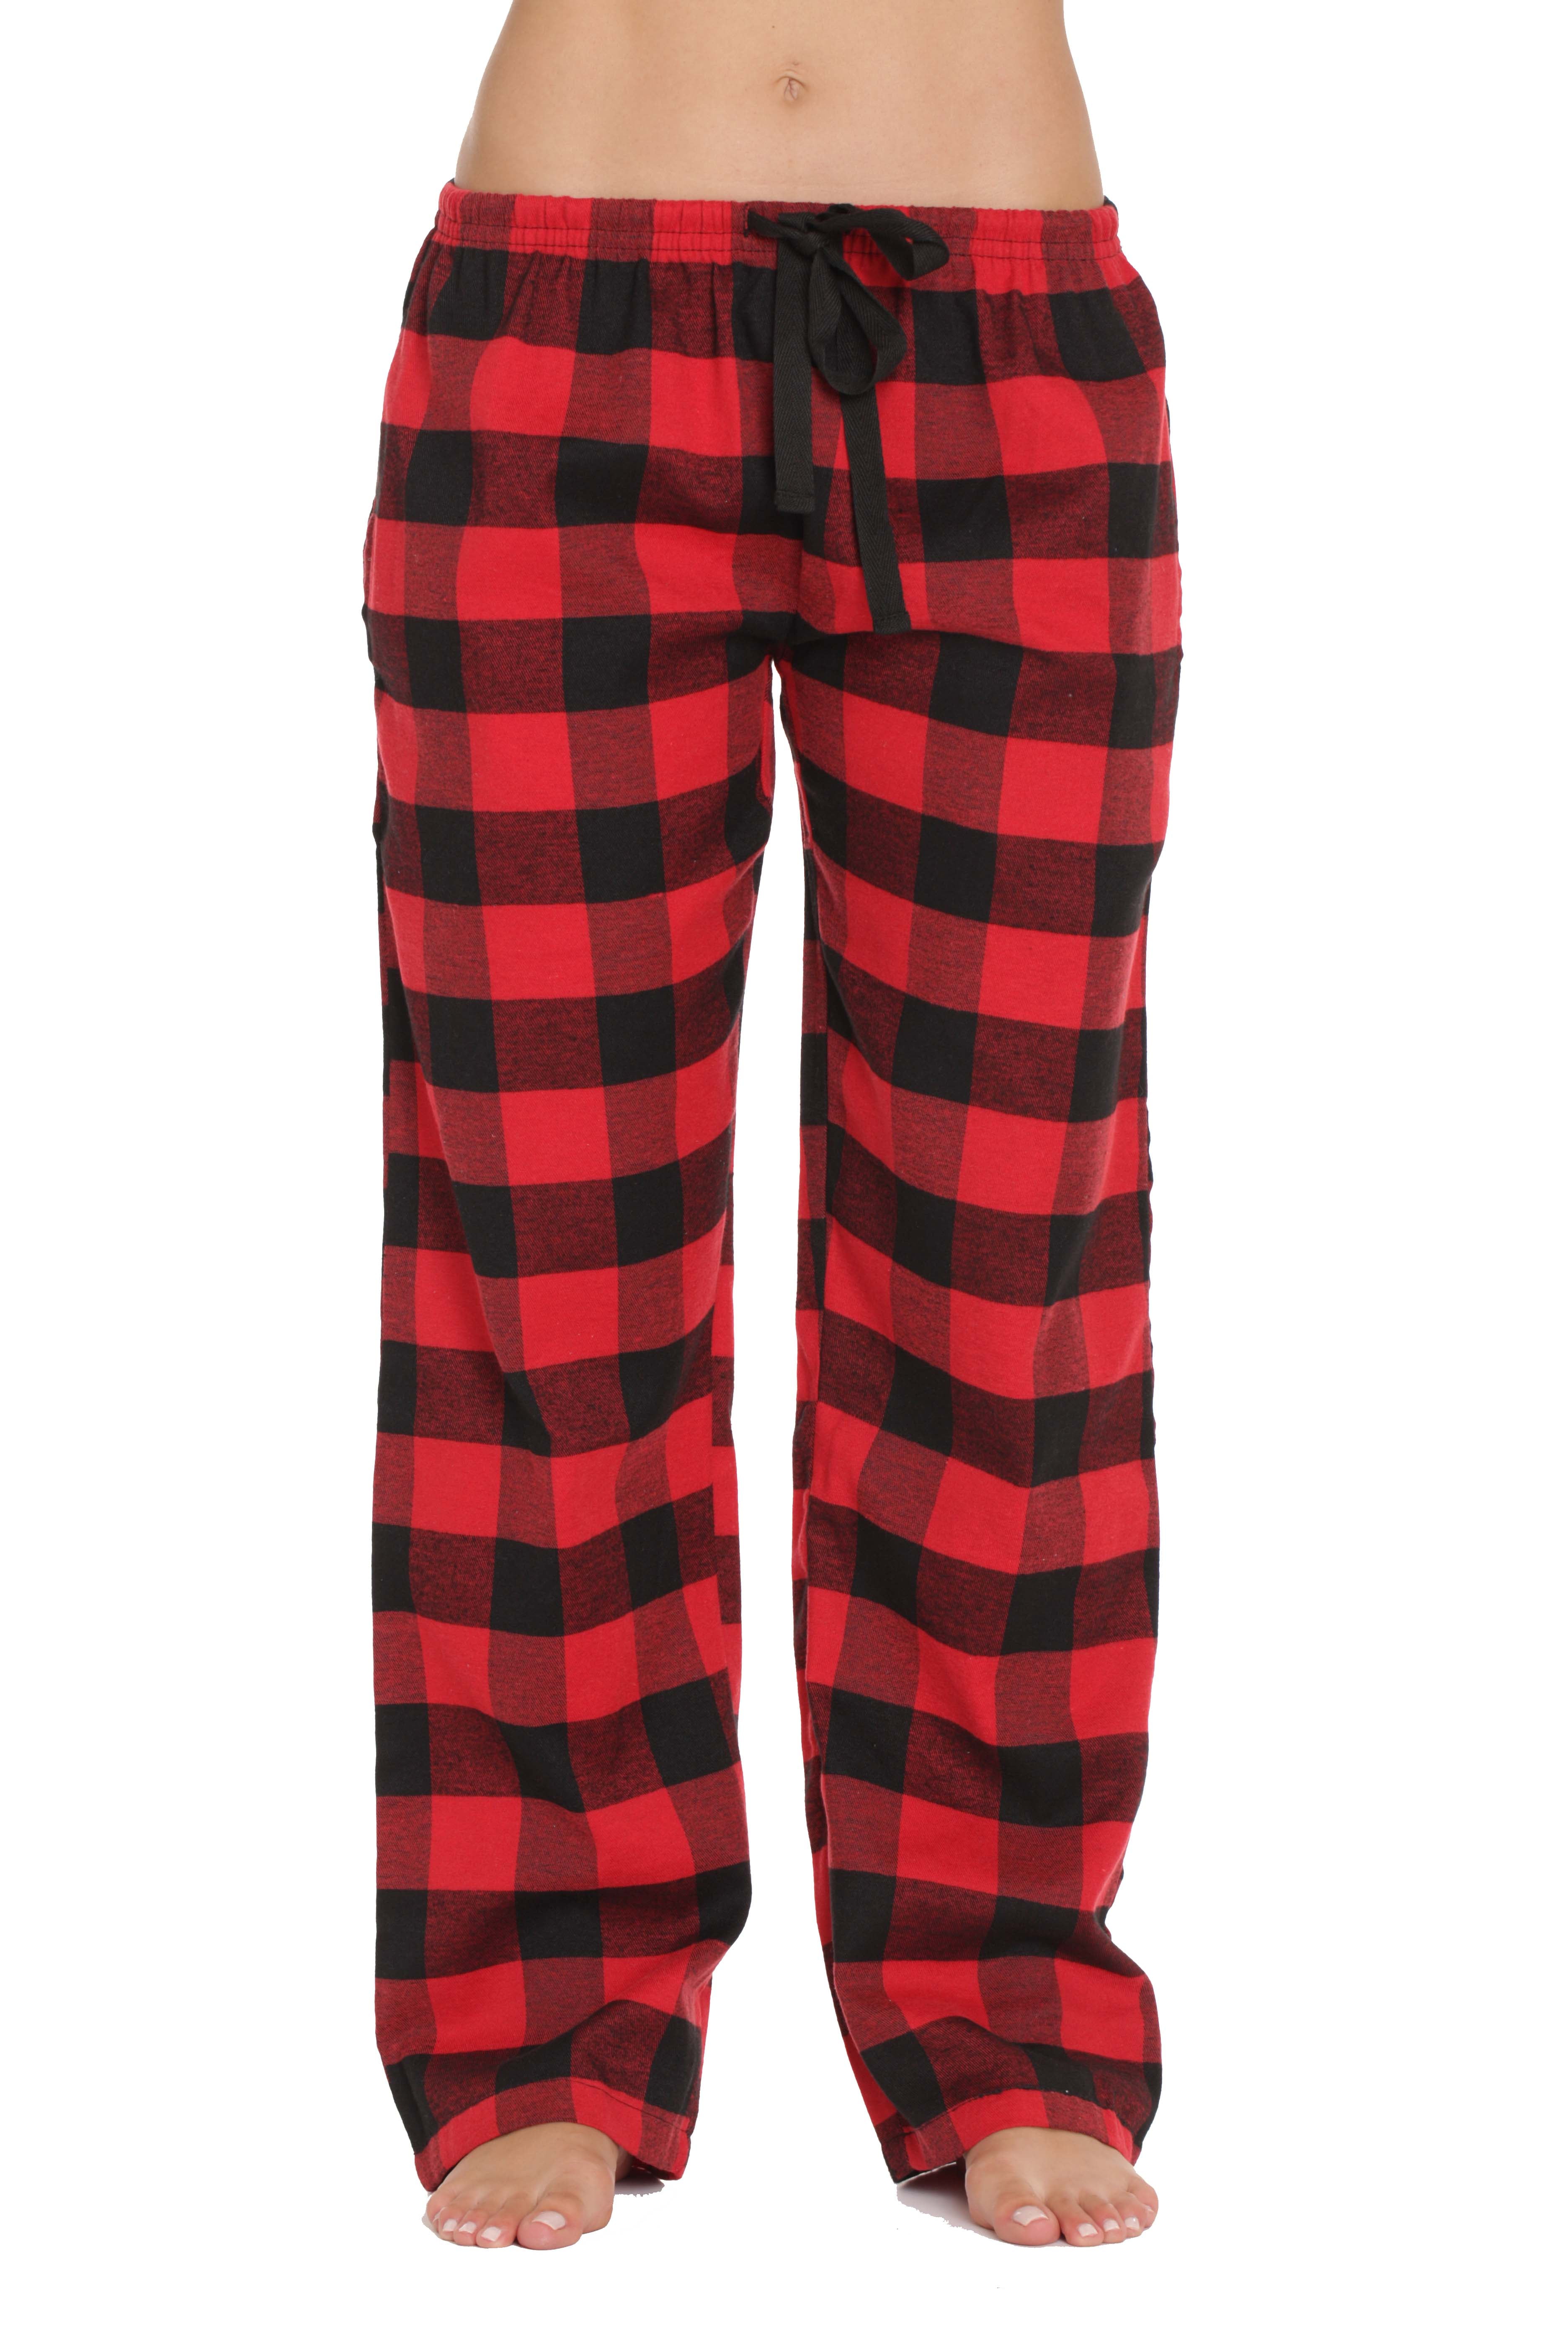 Texas Tech Red Raiders Womens Scatter Pattern Floral Pajama Lounge Pants